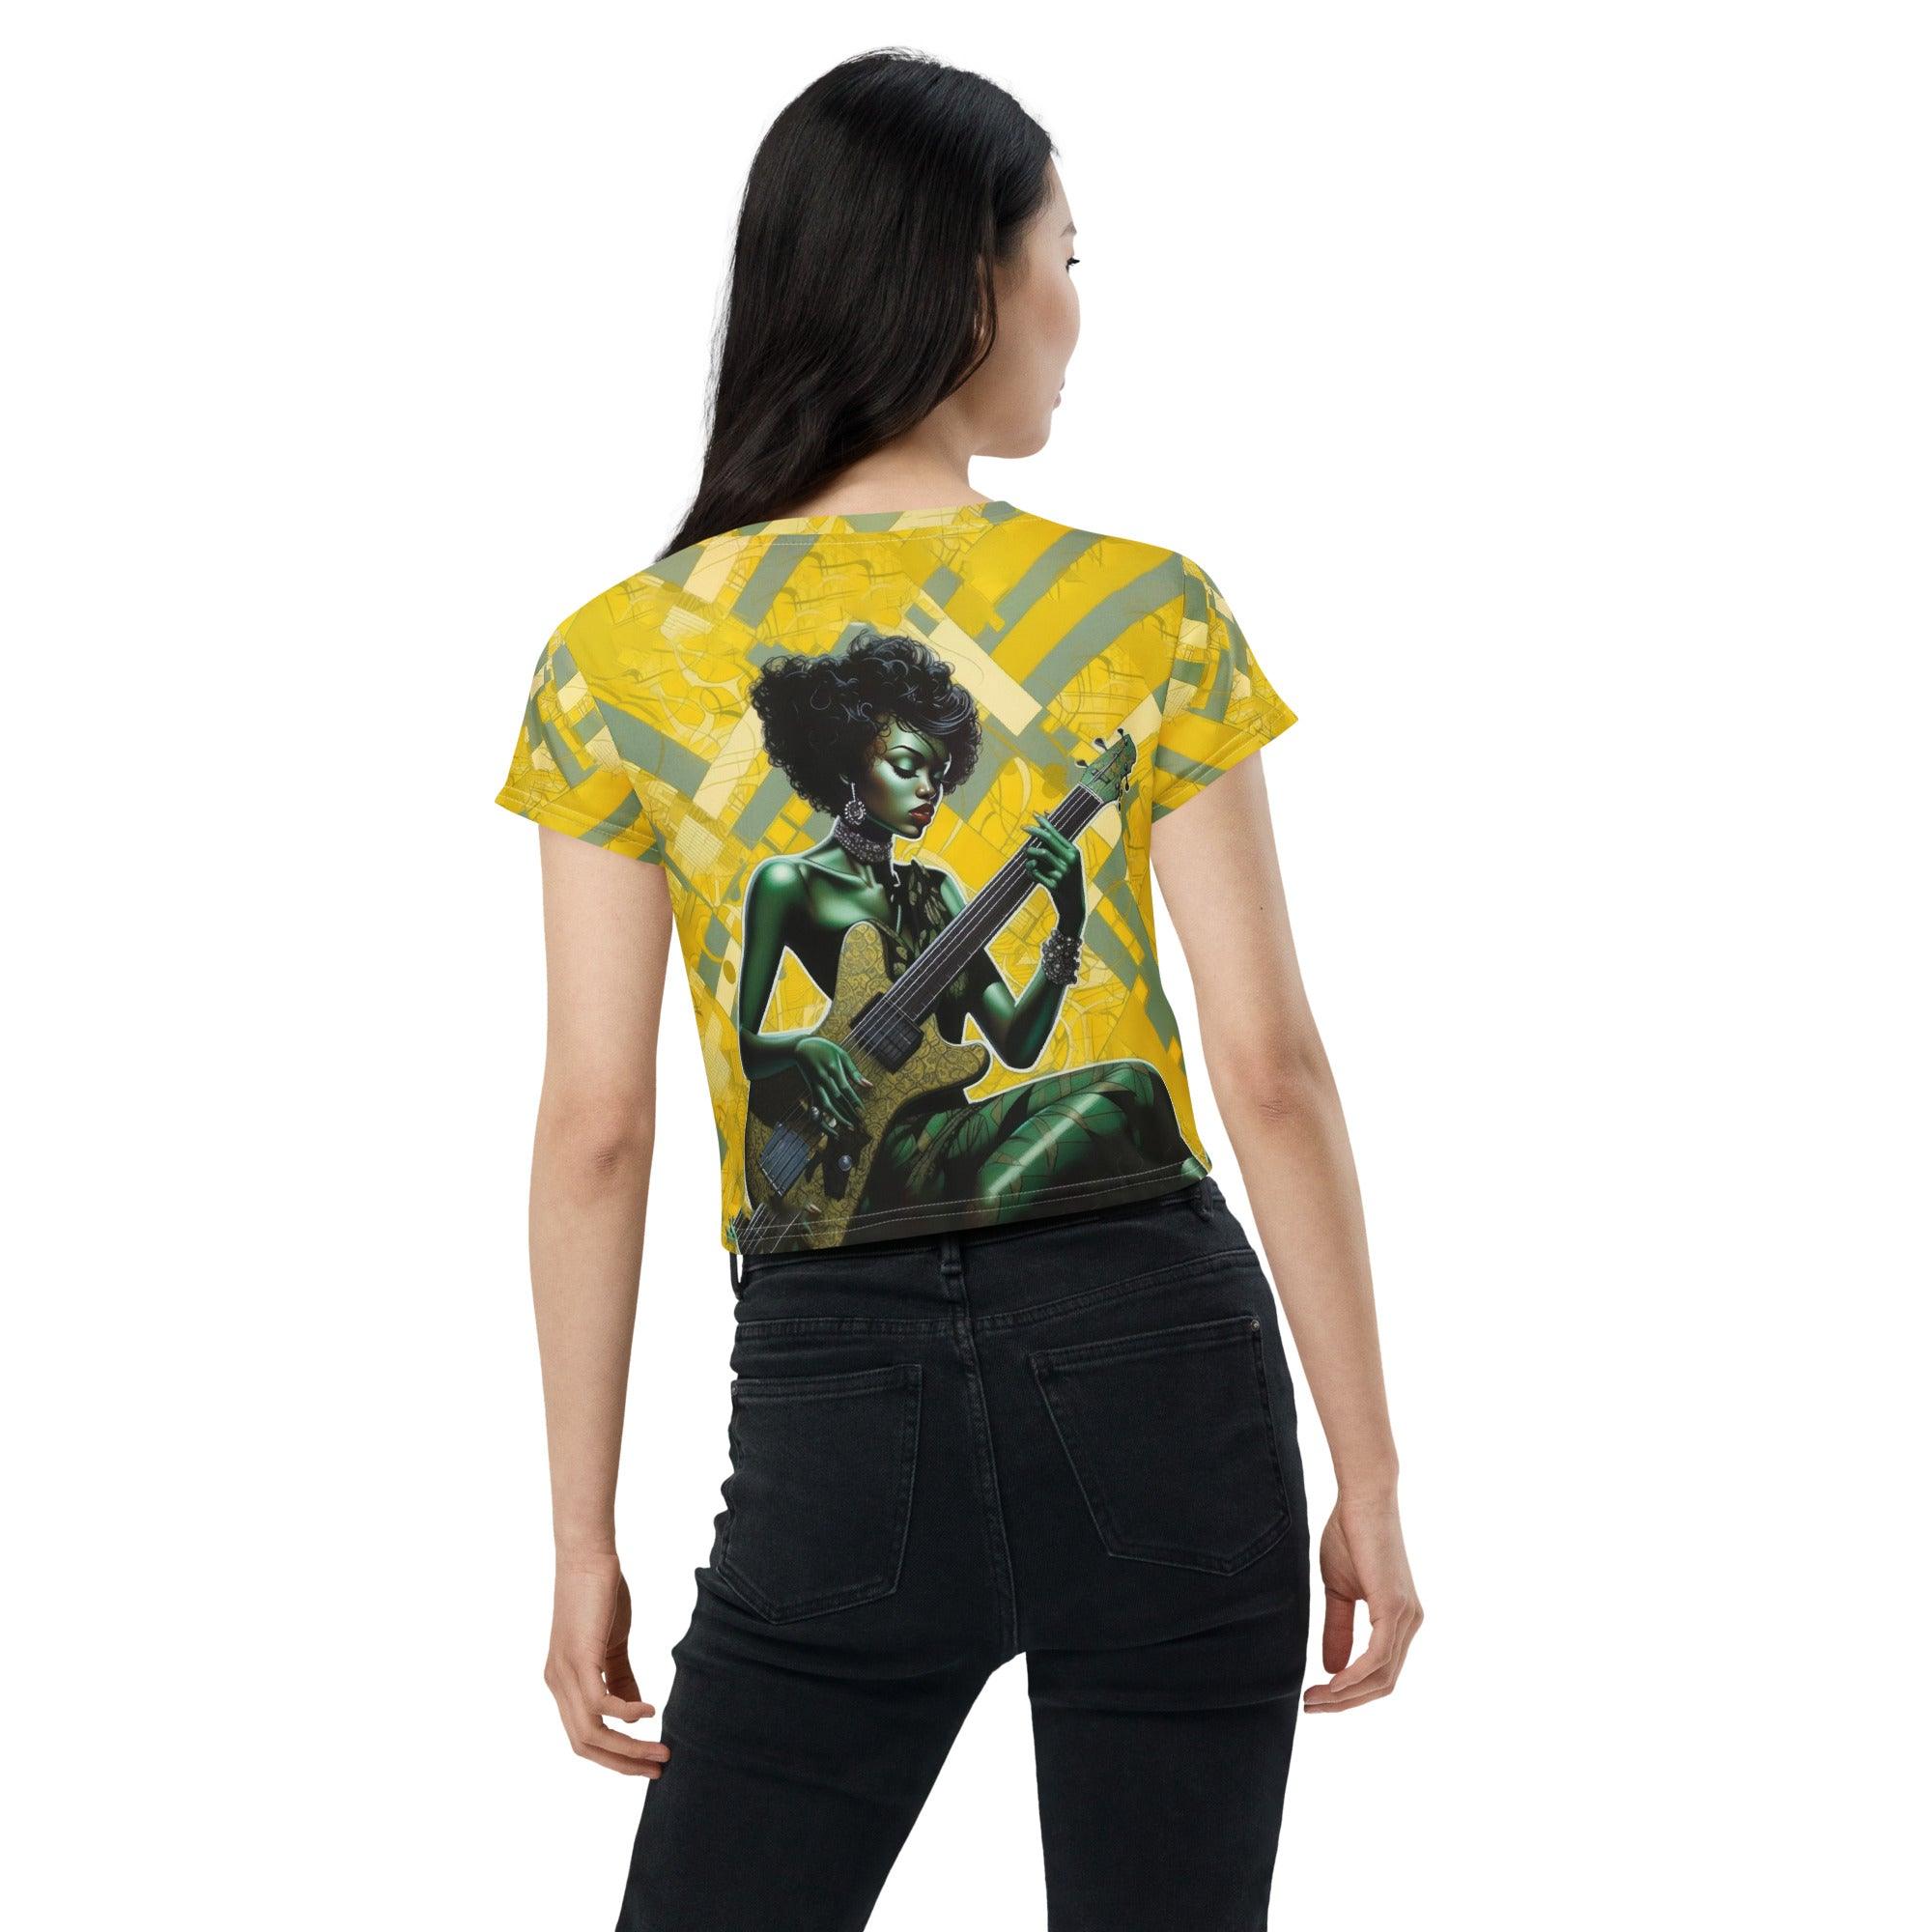 Coolest Instrument All Over Print Crop Tee Side View